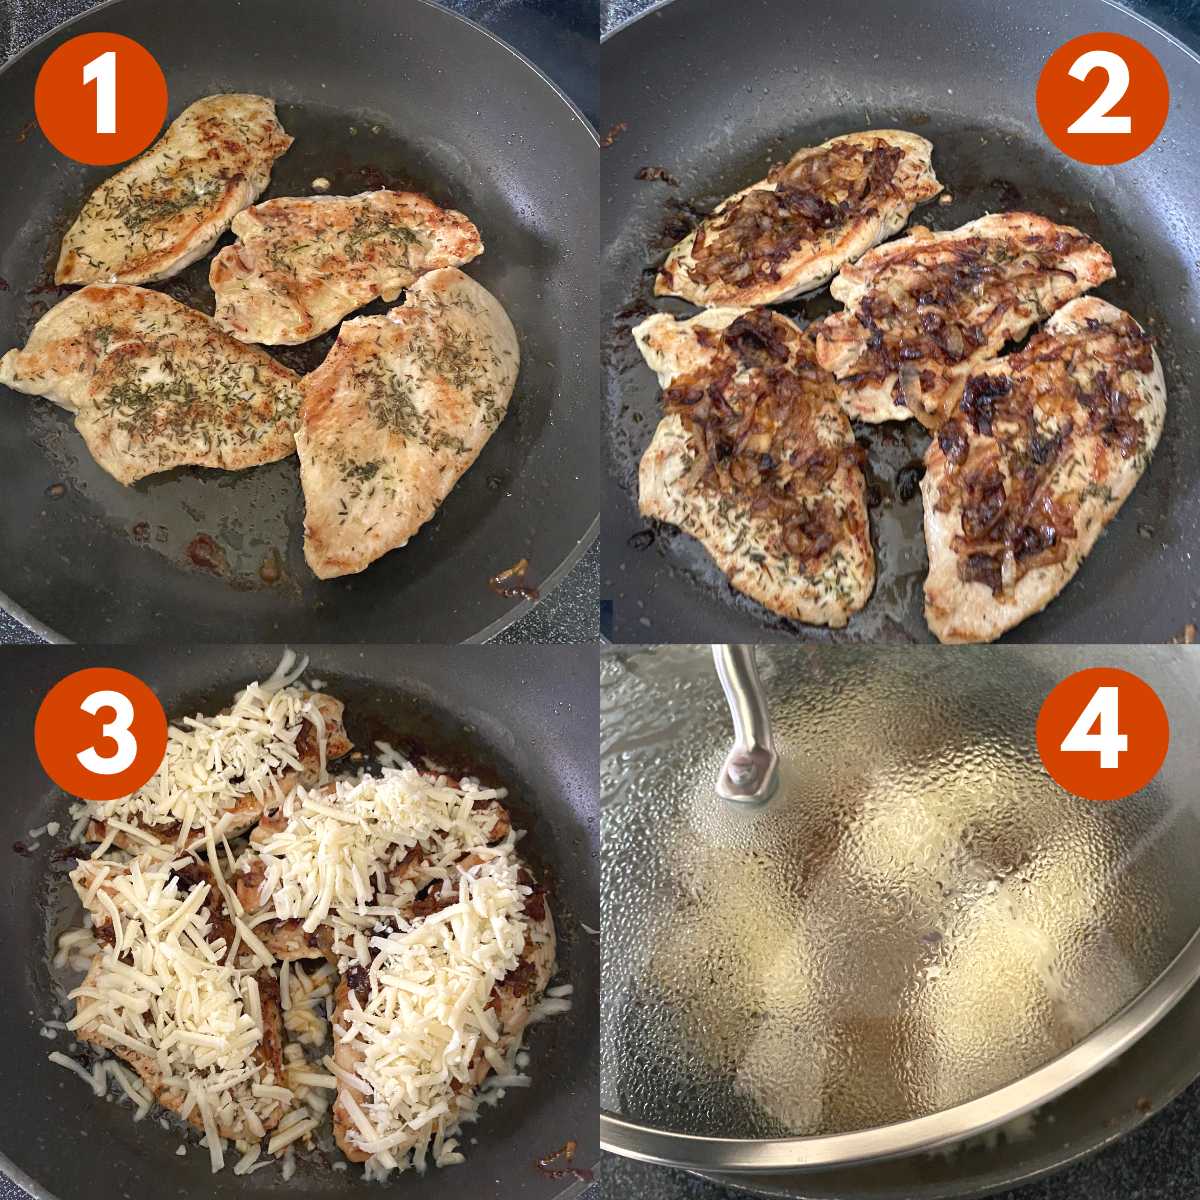 Step collage to make French onion chicken in a skillet: 1) Seasoned chicken in the pan, 2) Chicken breasts topped with caramelized onion, 3) Shredded Gruyére cheese added 4) Lid covering chicken and toppings to melt it.